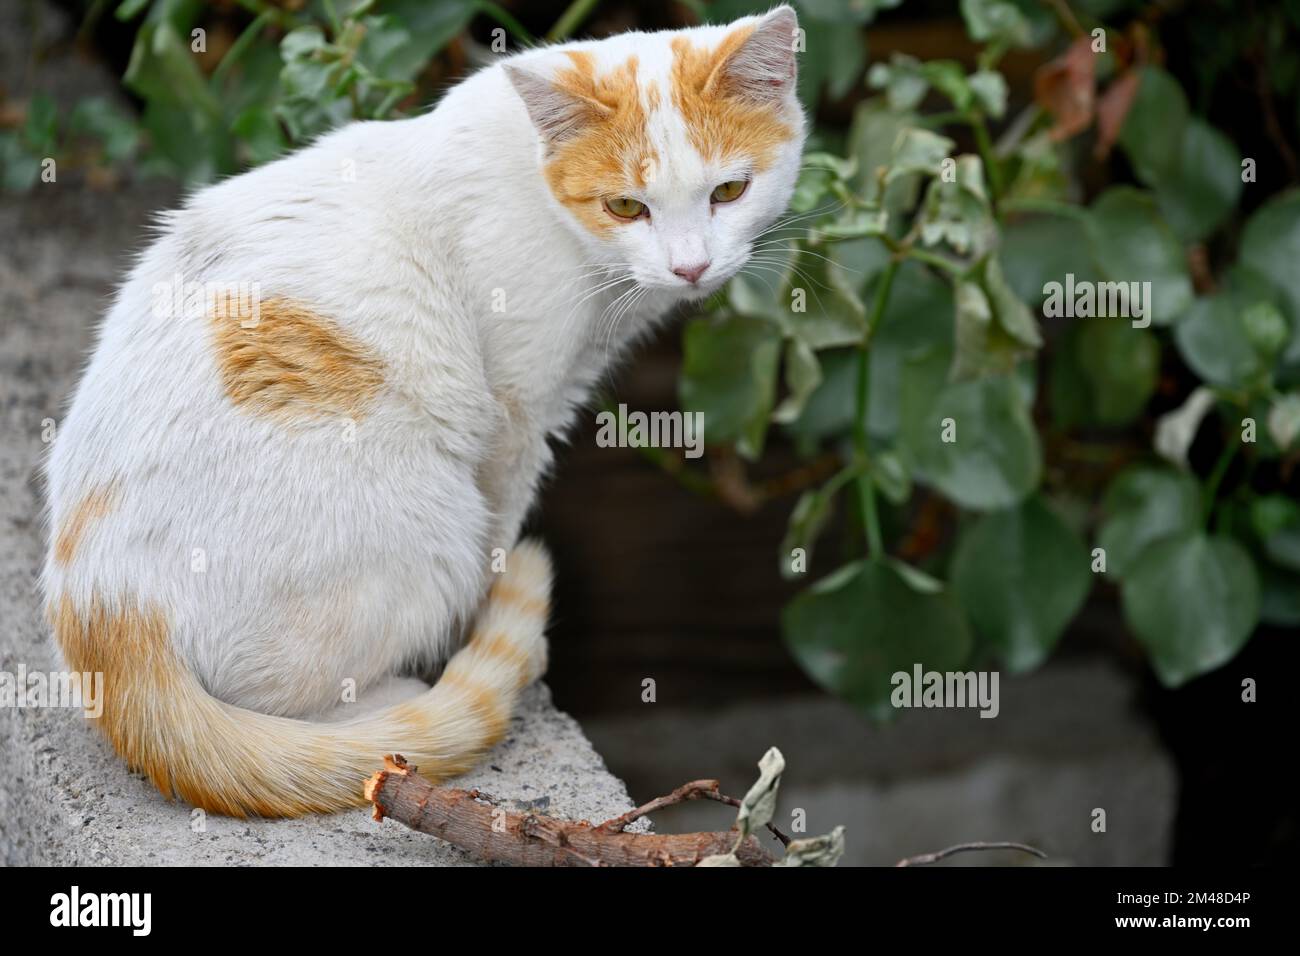 Ginger and white cat sitting outside on wall Stock Photo